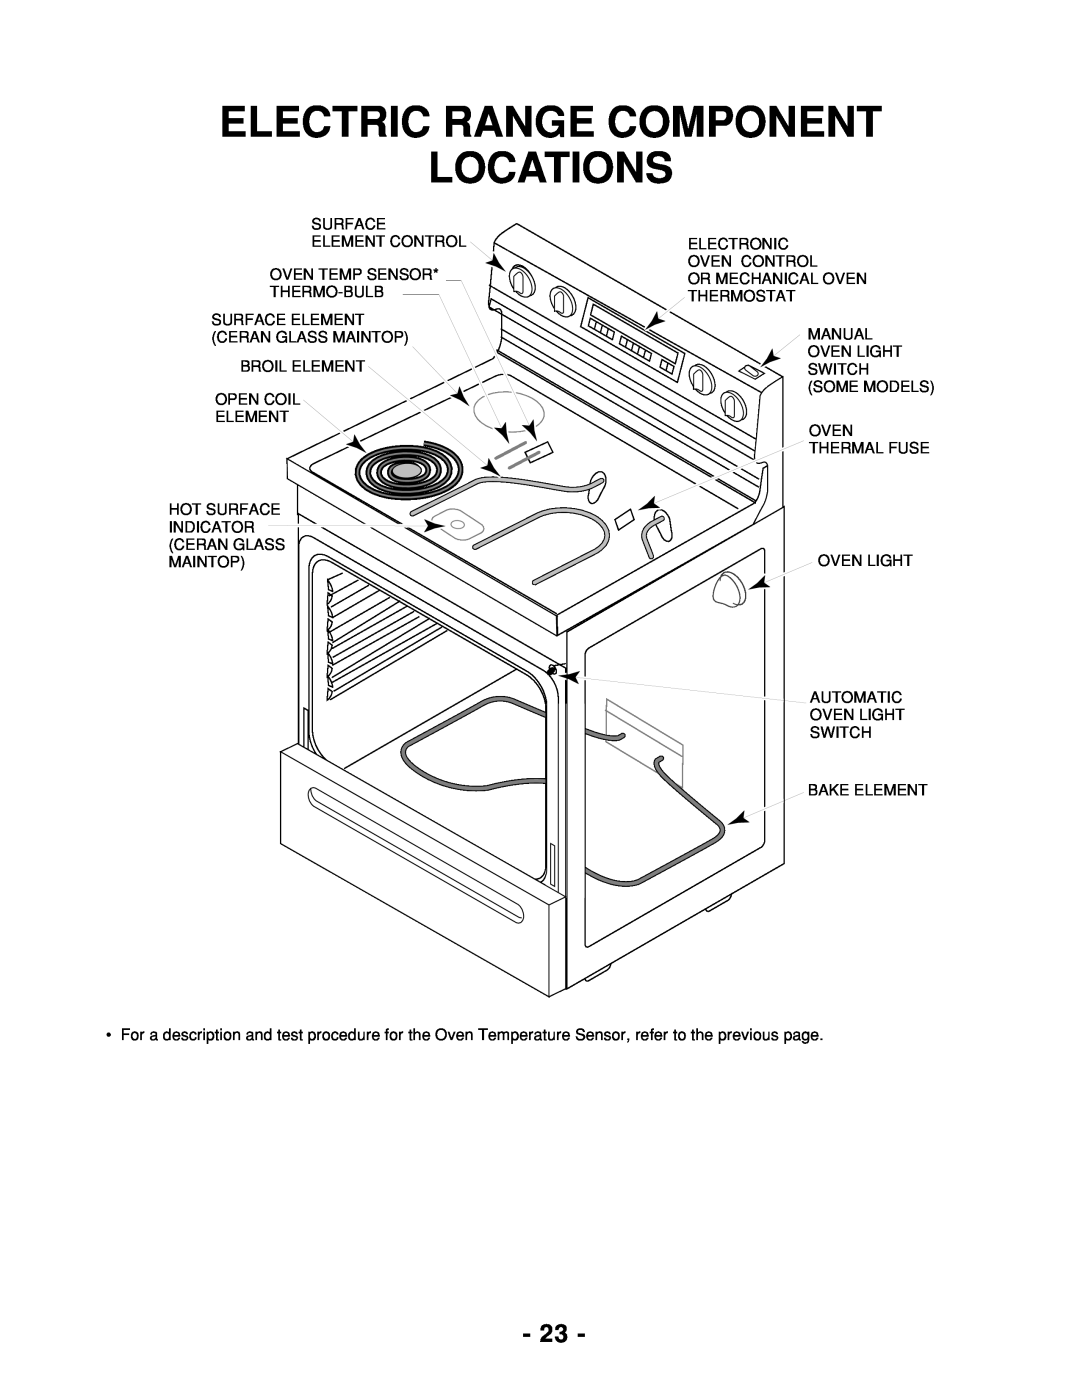 Whirlpool 465 manual Electric Range Component Locations 